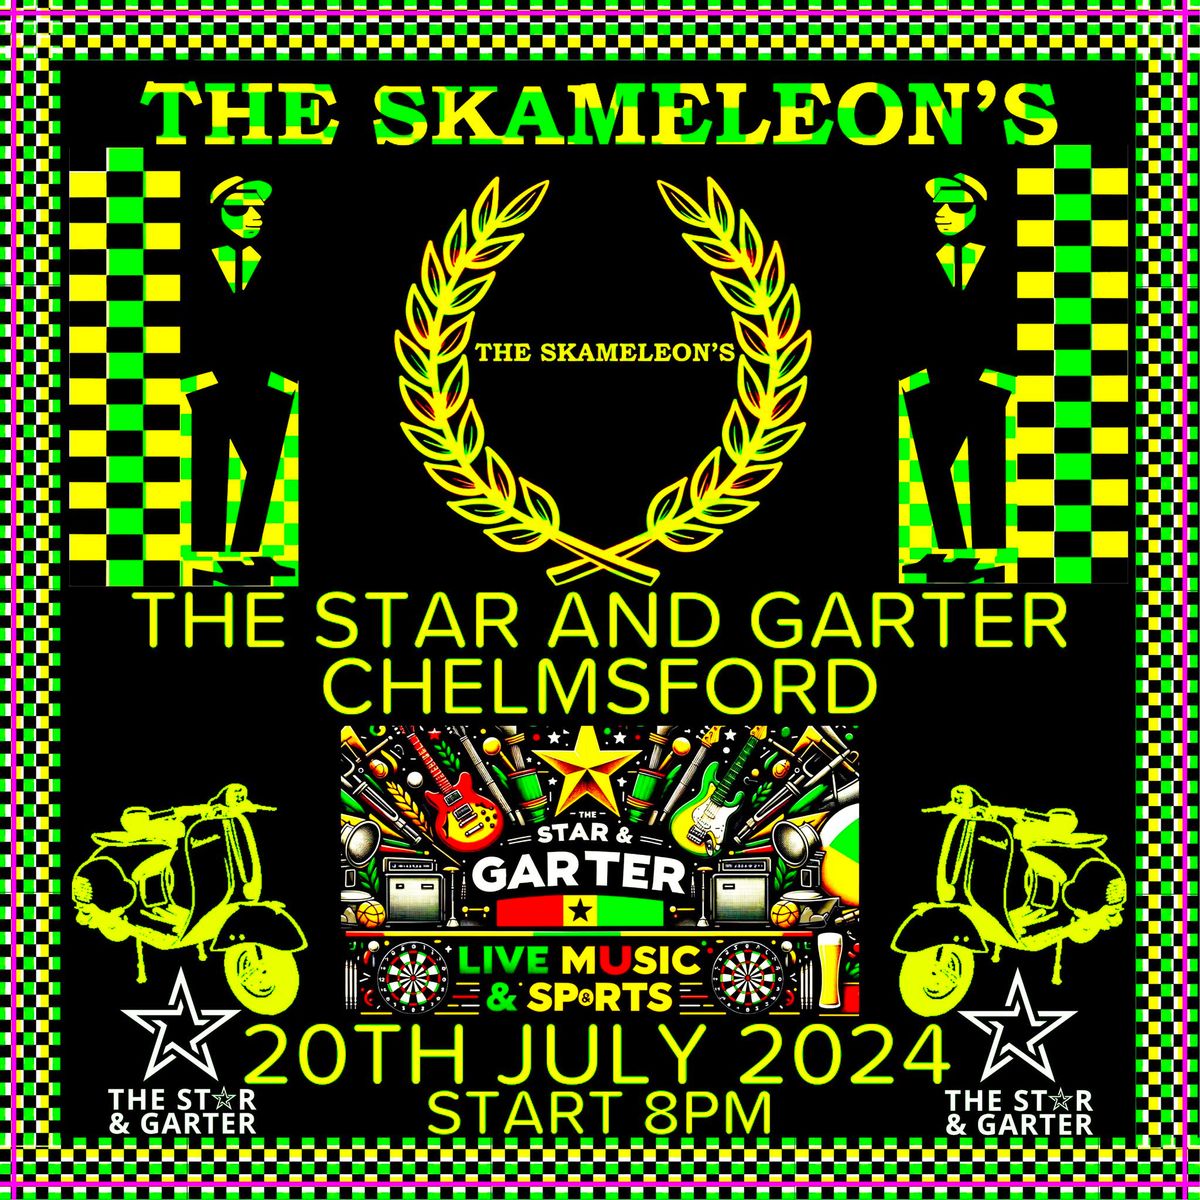 The Star and Garter 